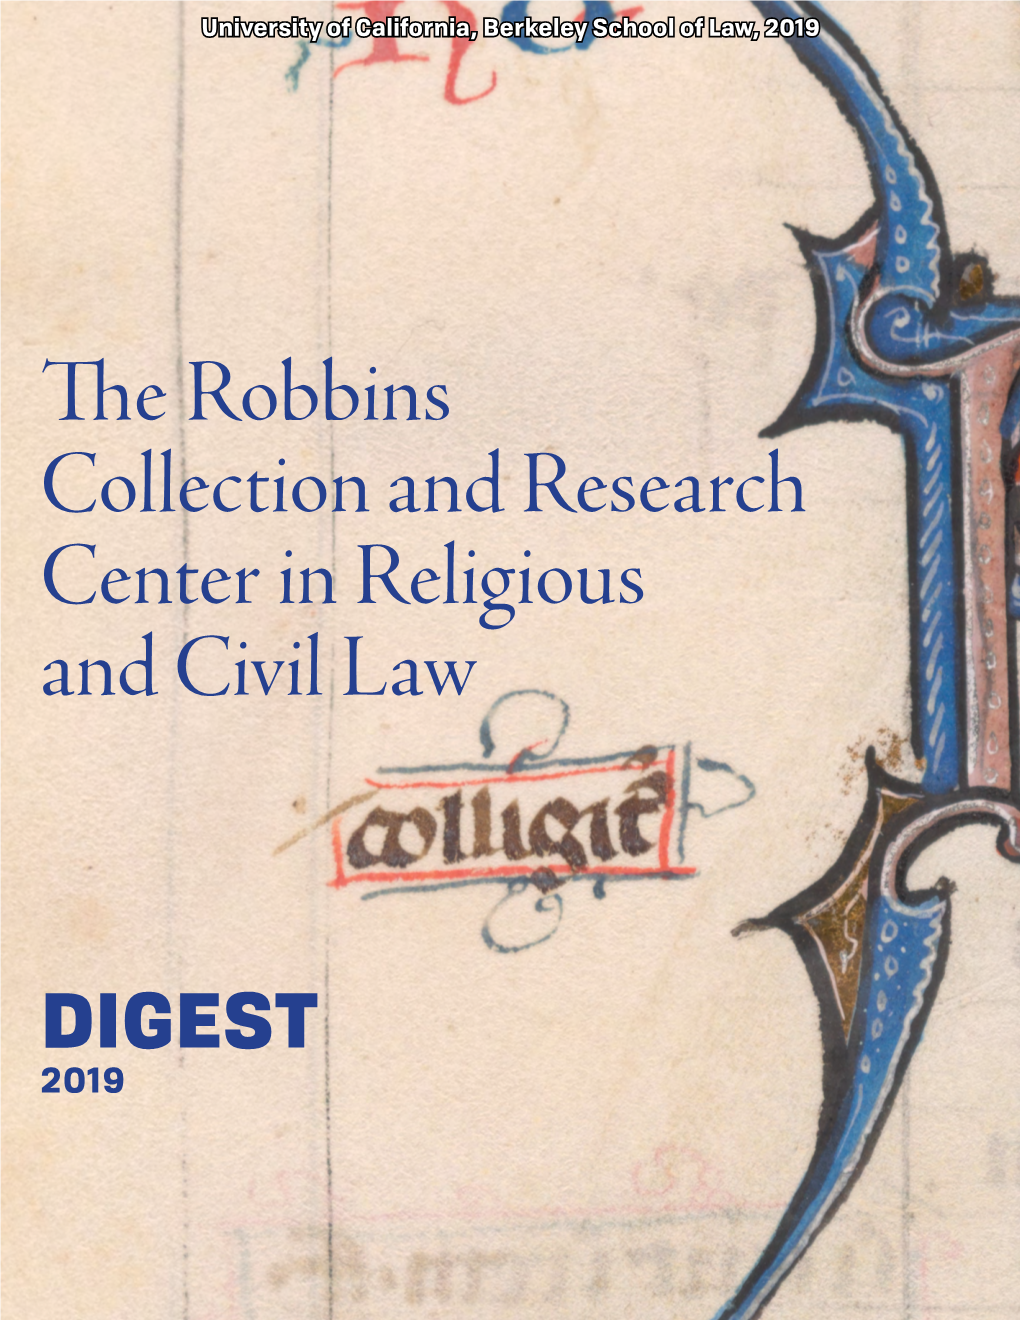 The Robbins Collection and Research Center in Religious and Civil Law